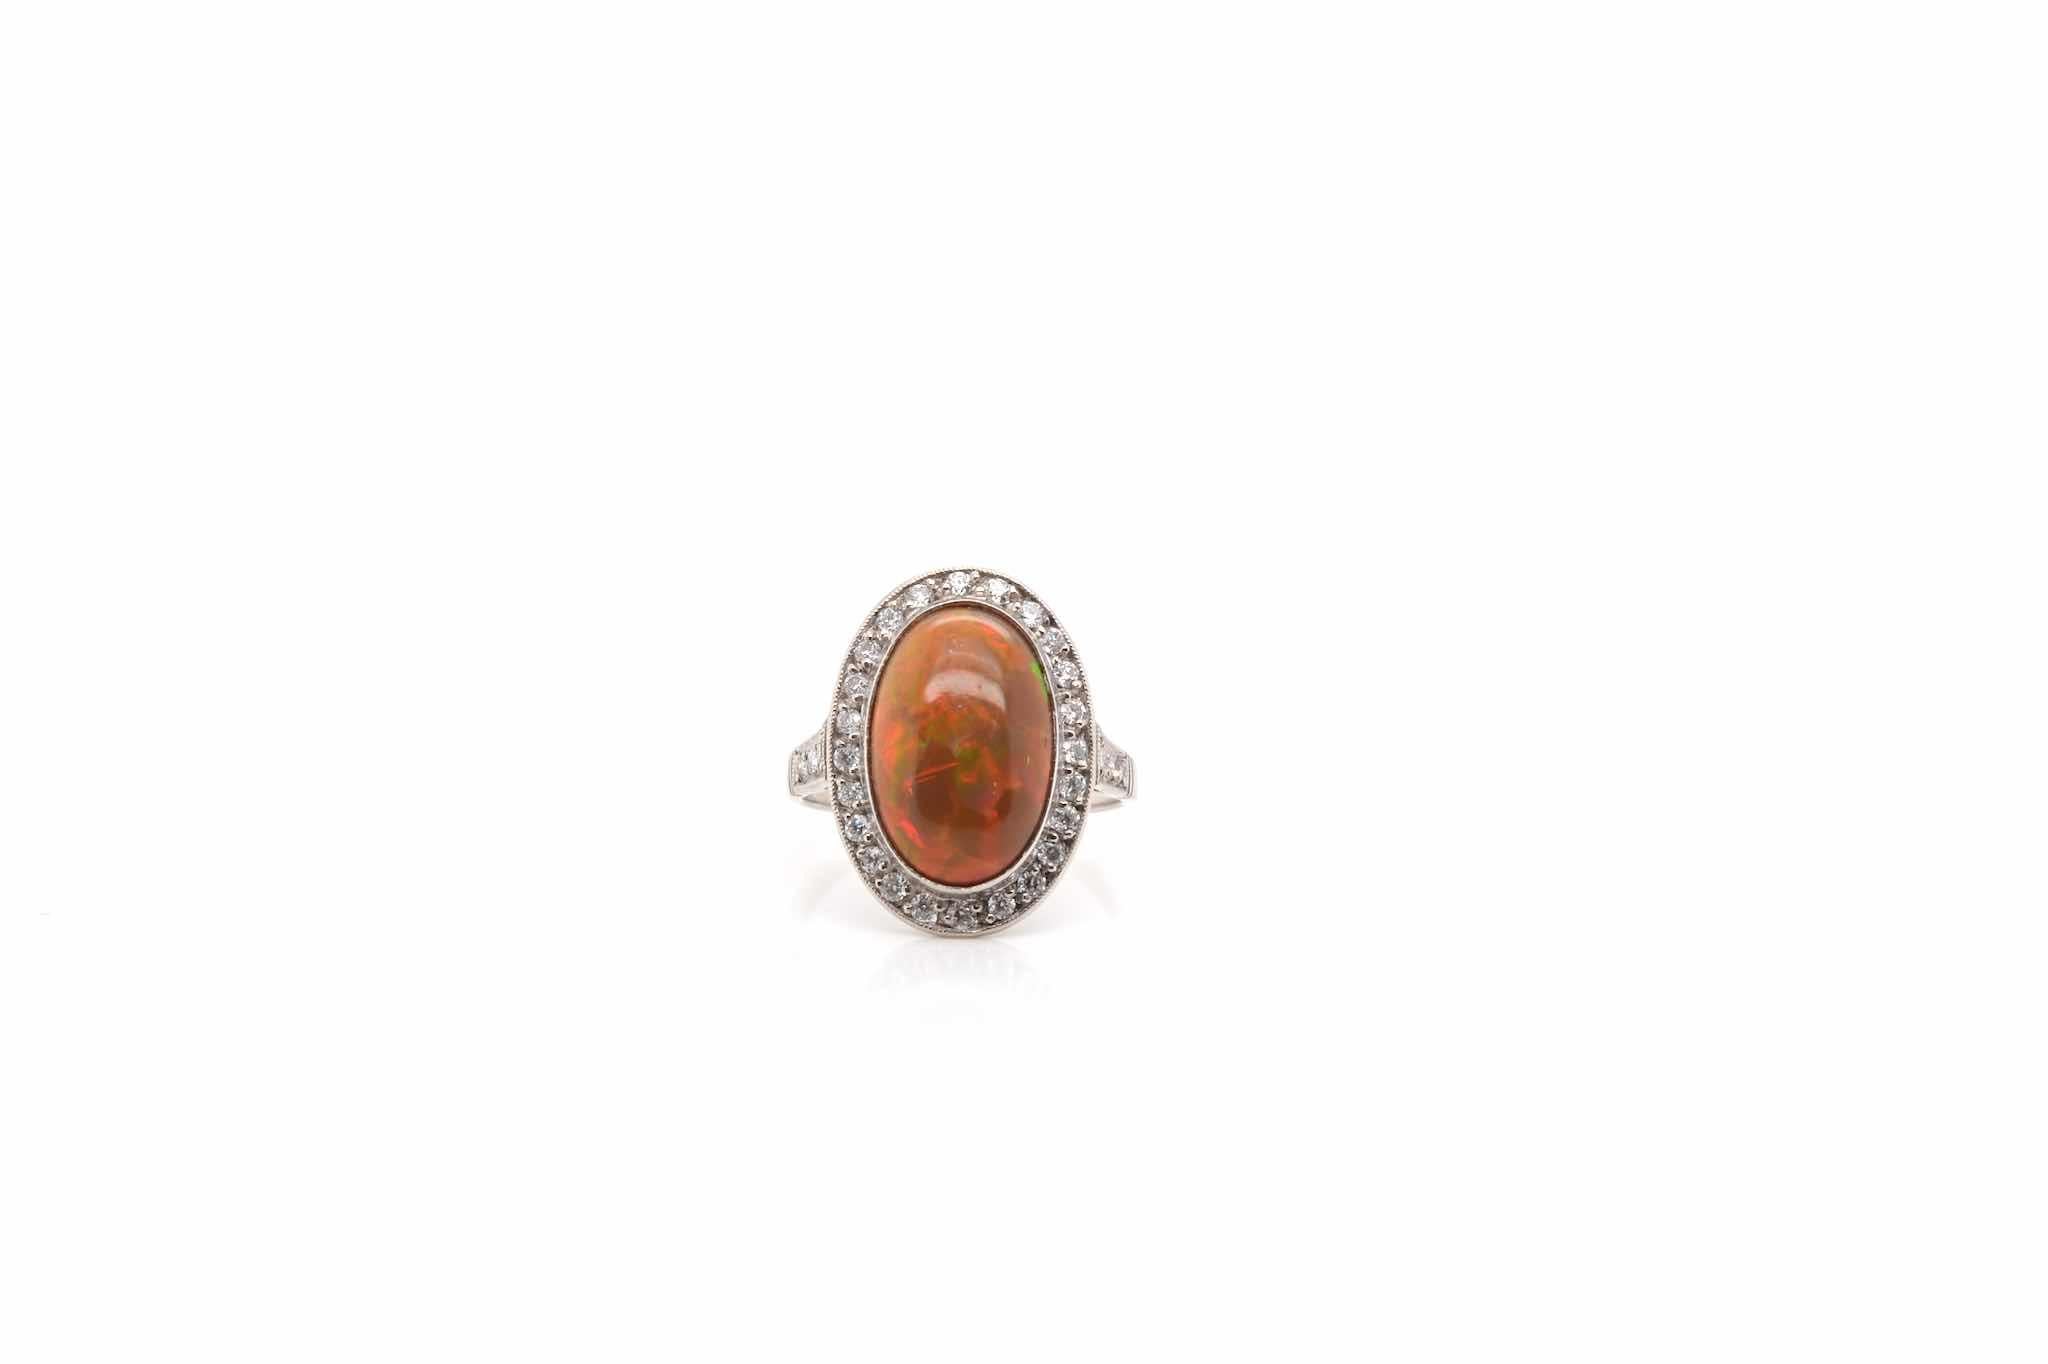 Stones: Fire opal and diamonds
for a total weight of 0.35 carat
Material: Platinum
Weight: 5.3g
Size: 52.5 (free sizing)
Certificate
Ref. : 22482